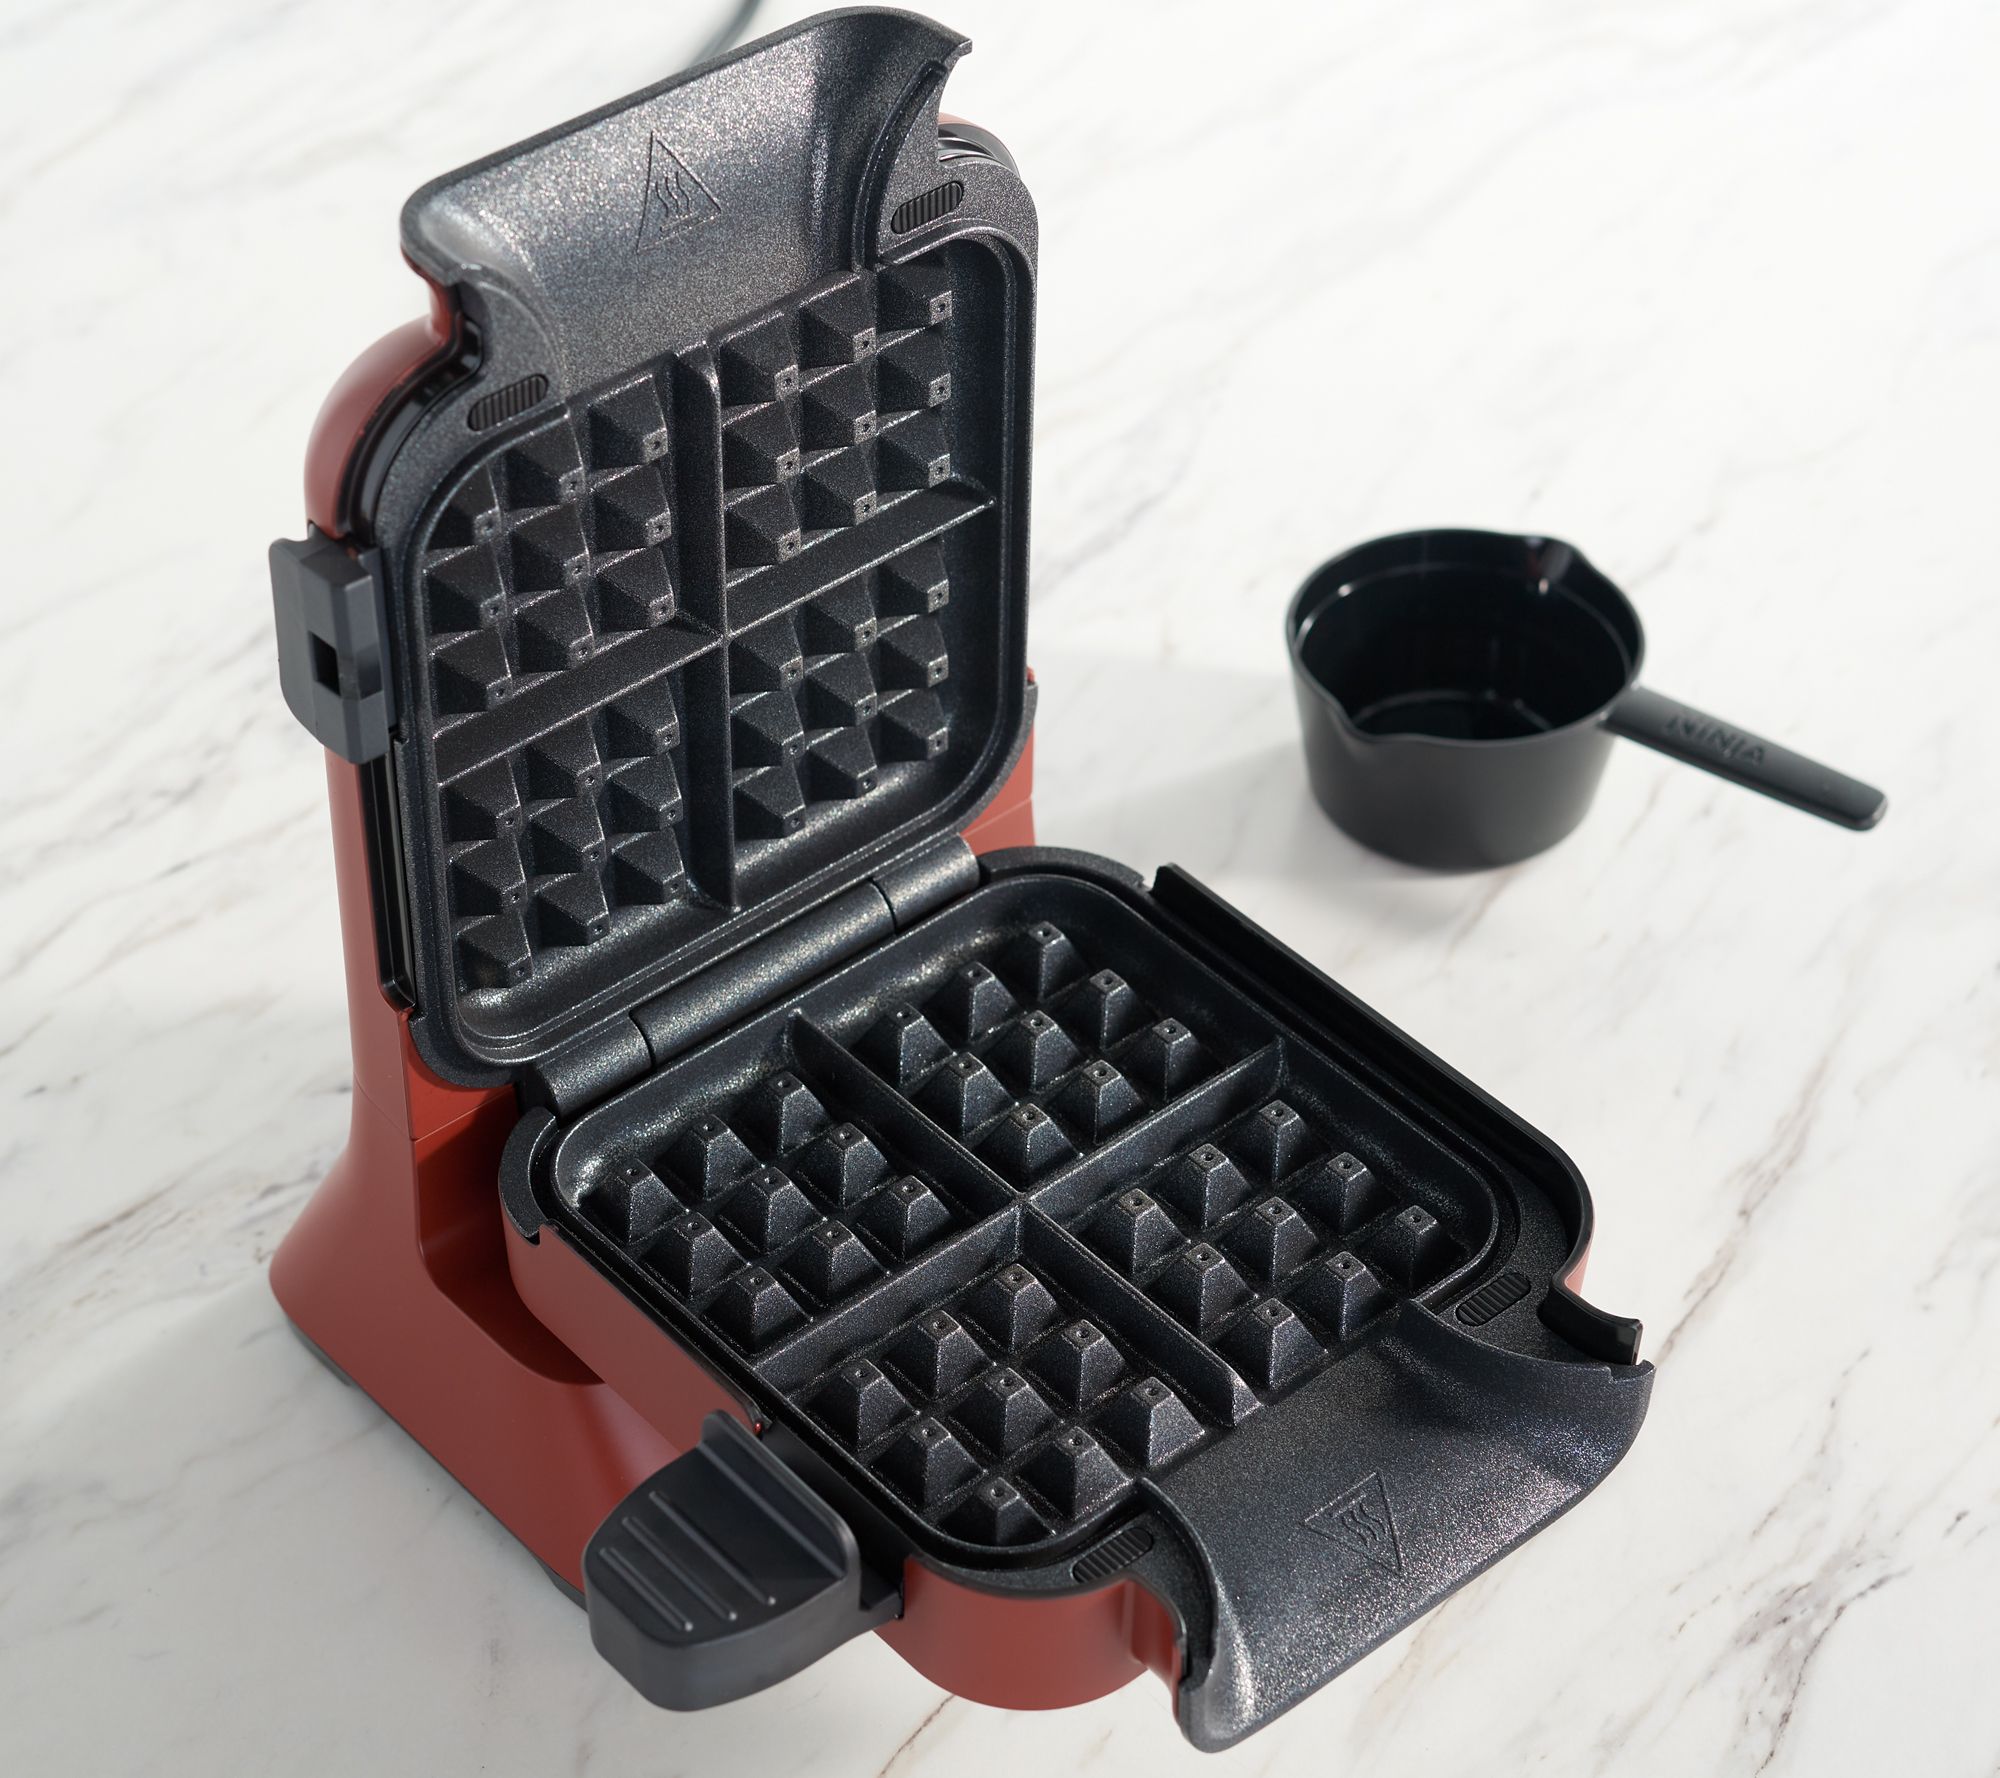 BELLA & DASH WAFFLE MAKERS! SIDE BY SIDE COMPARISON